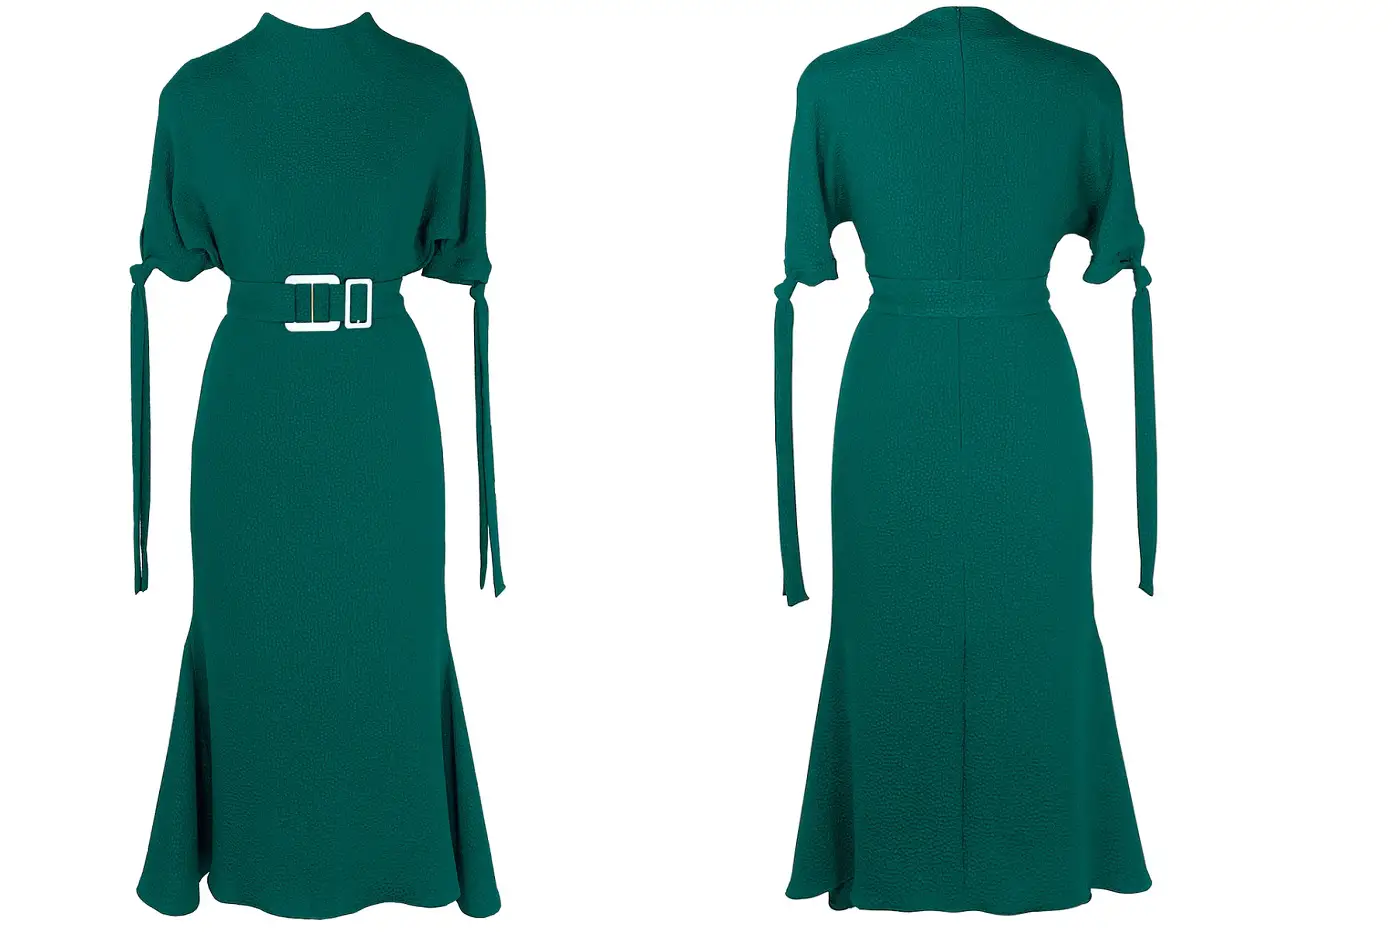 The Duchess of Cambridge wore Edeline Lee Pedernal Dress in May 2022